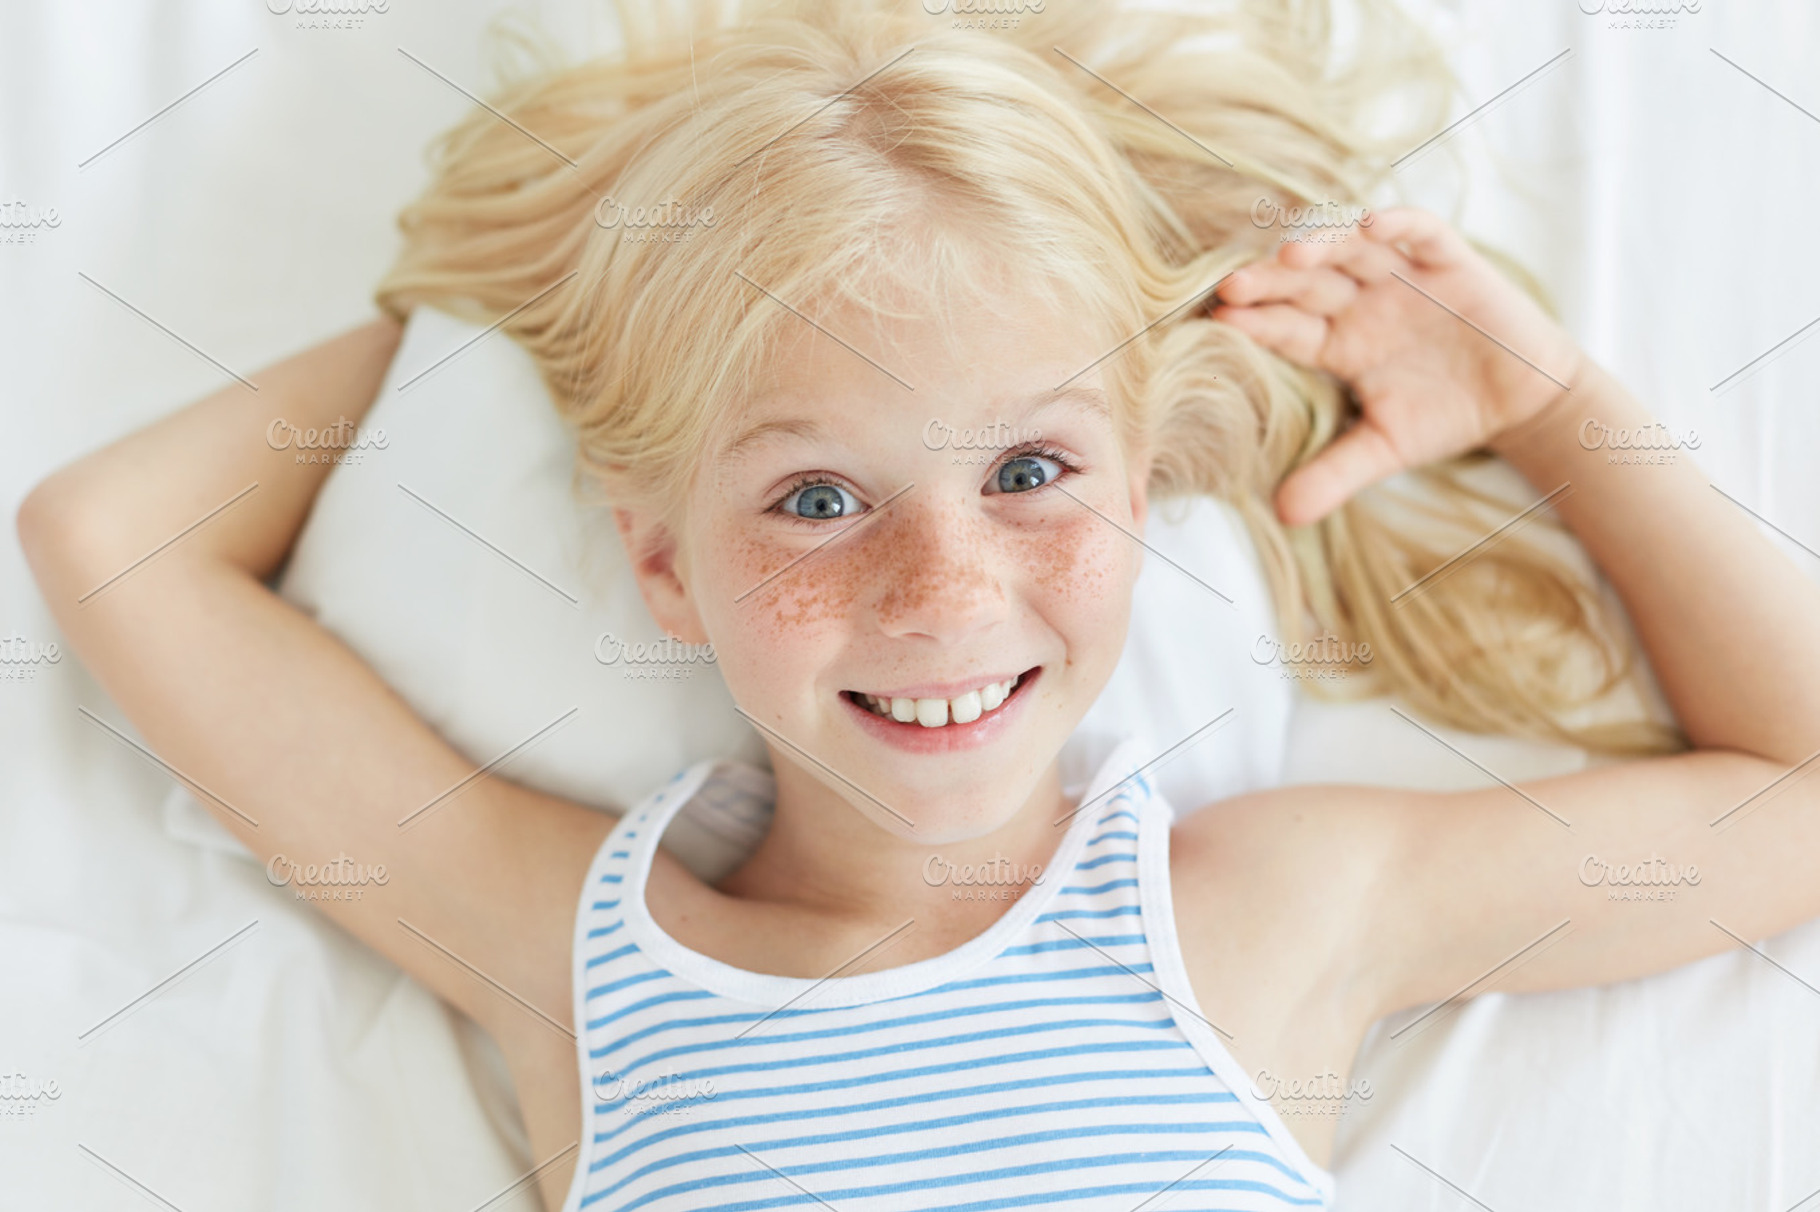 Cute Little Female Child With Blonde Hair Blue Eyes And Freckled